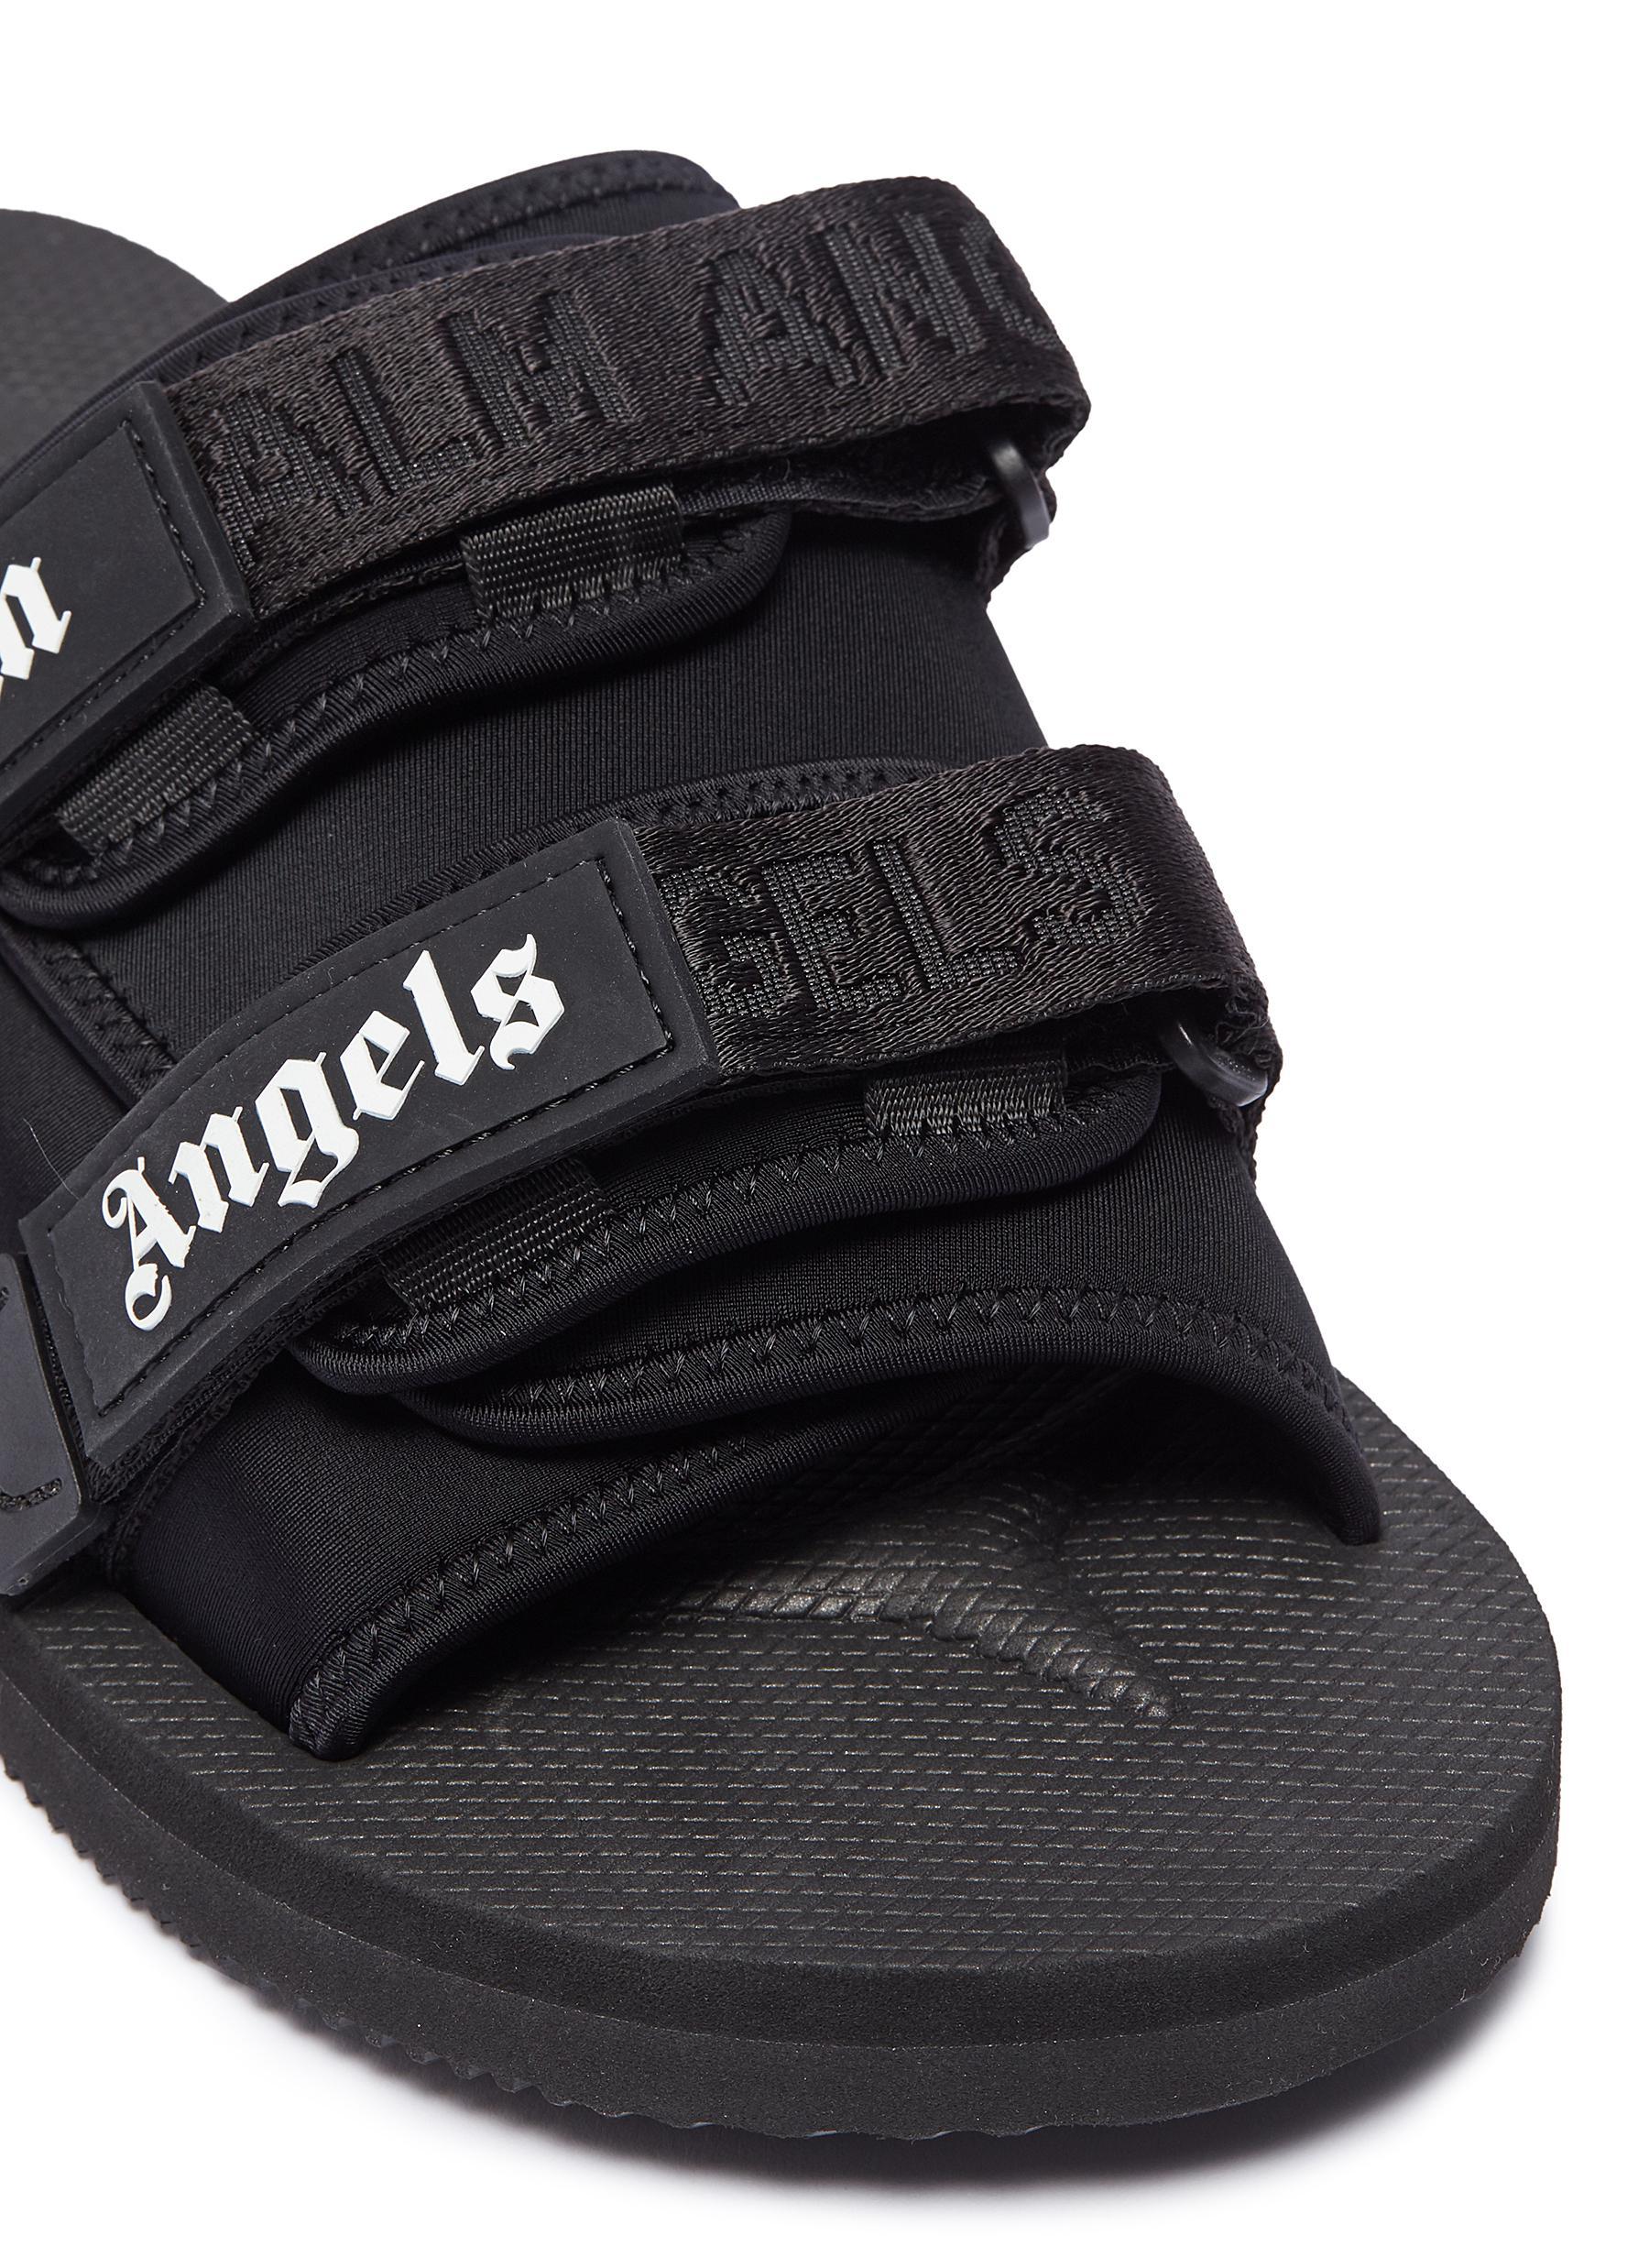 Suicoke x Palm Angels Sandals Available in Tokyo Pop-Up Shop – PAUSE Online